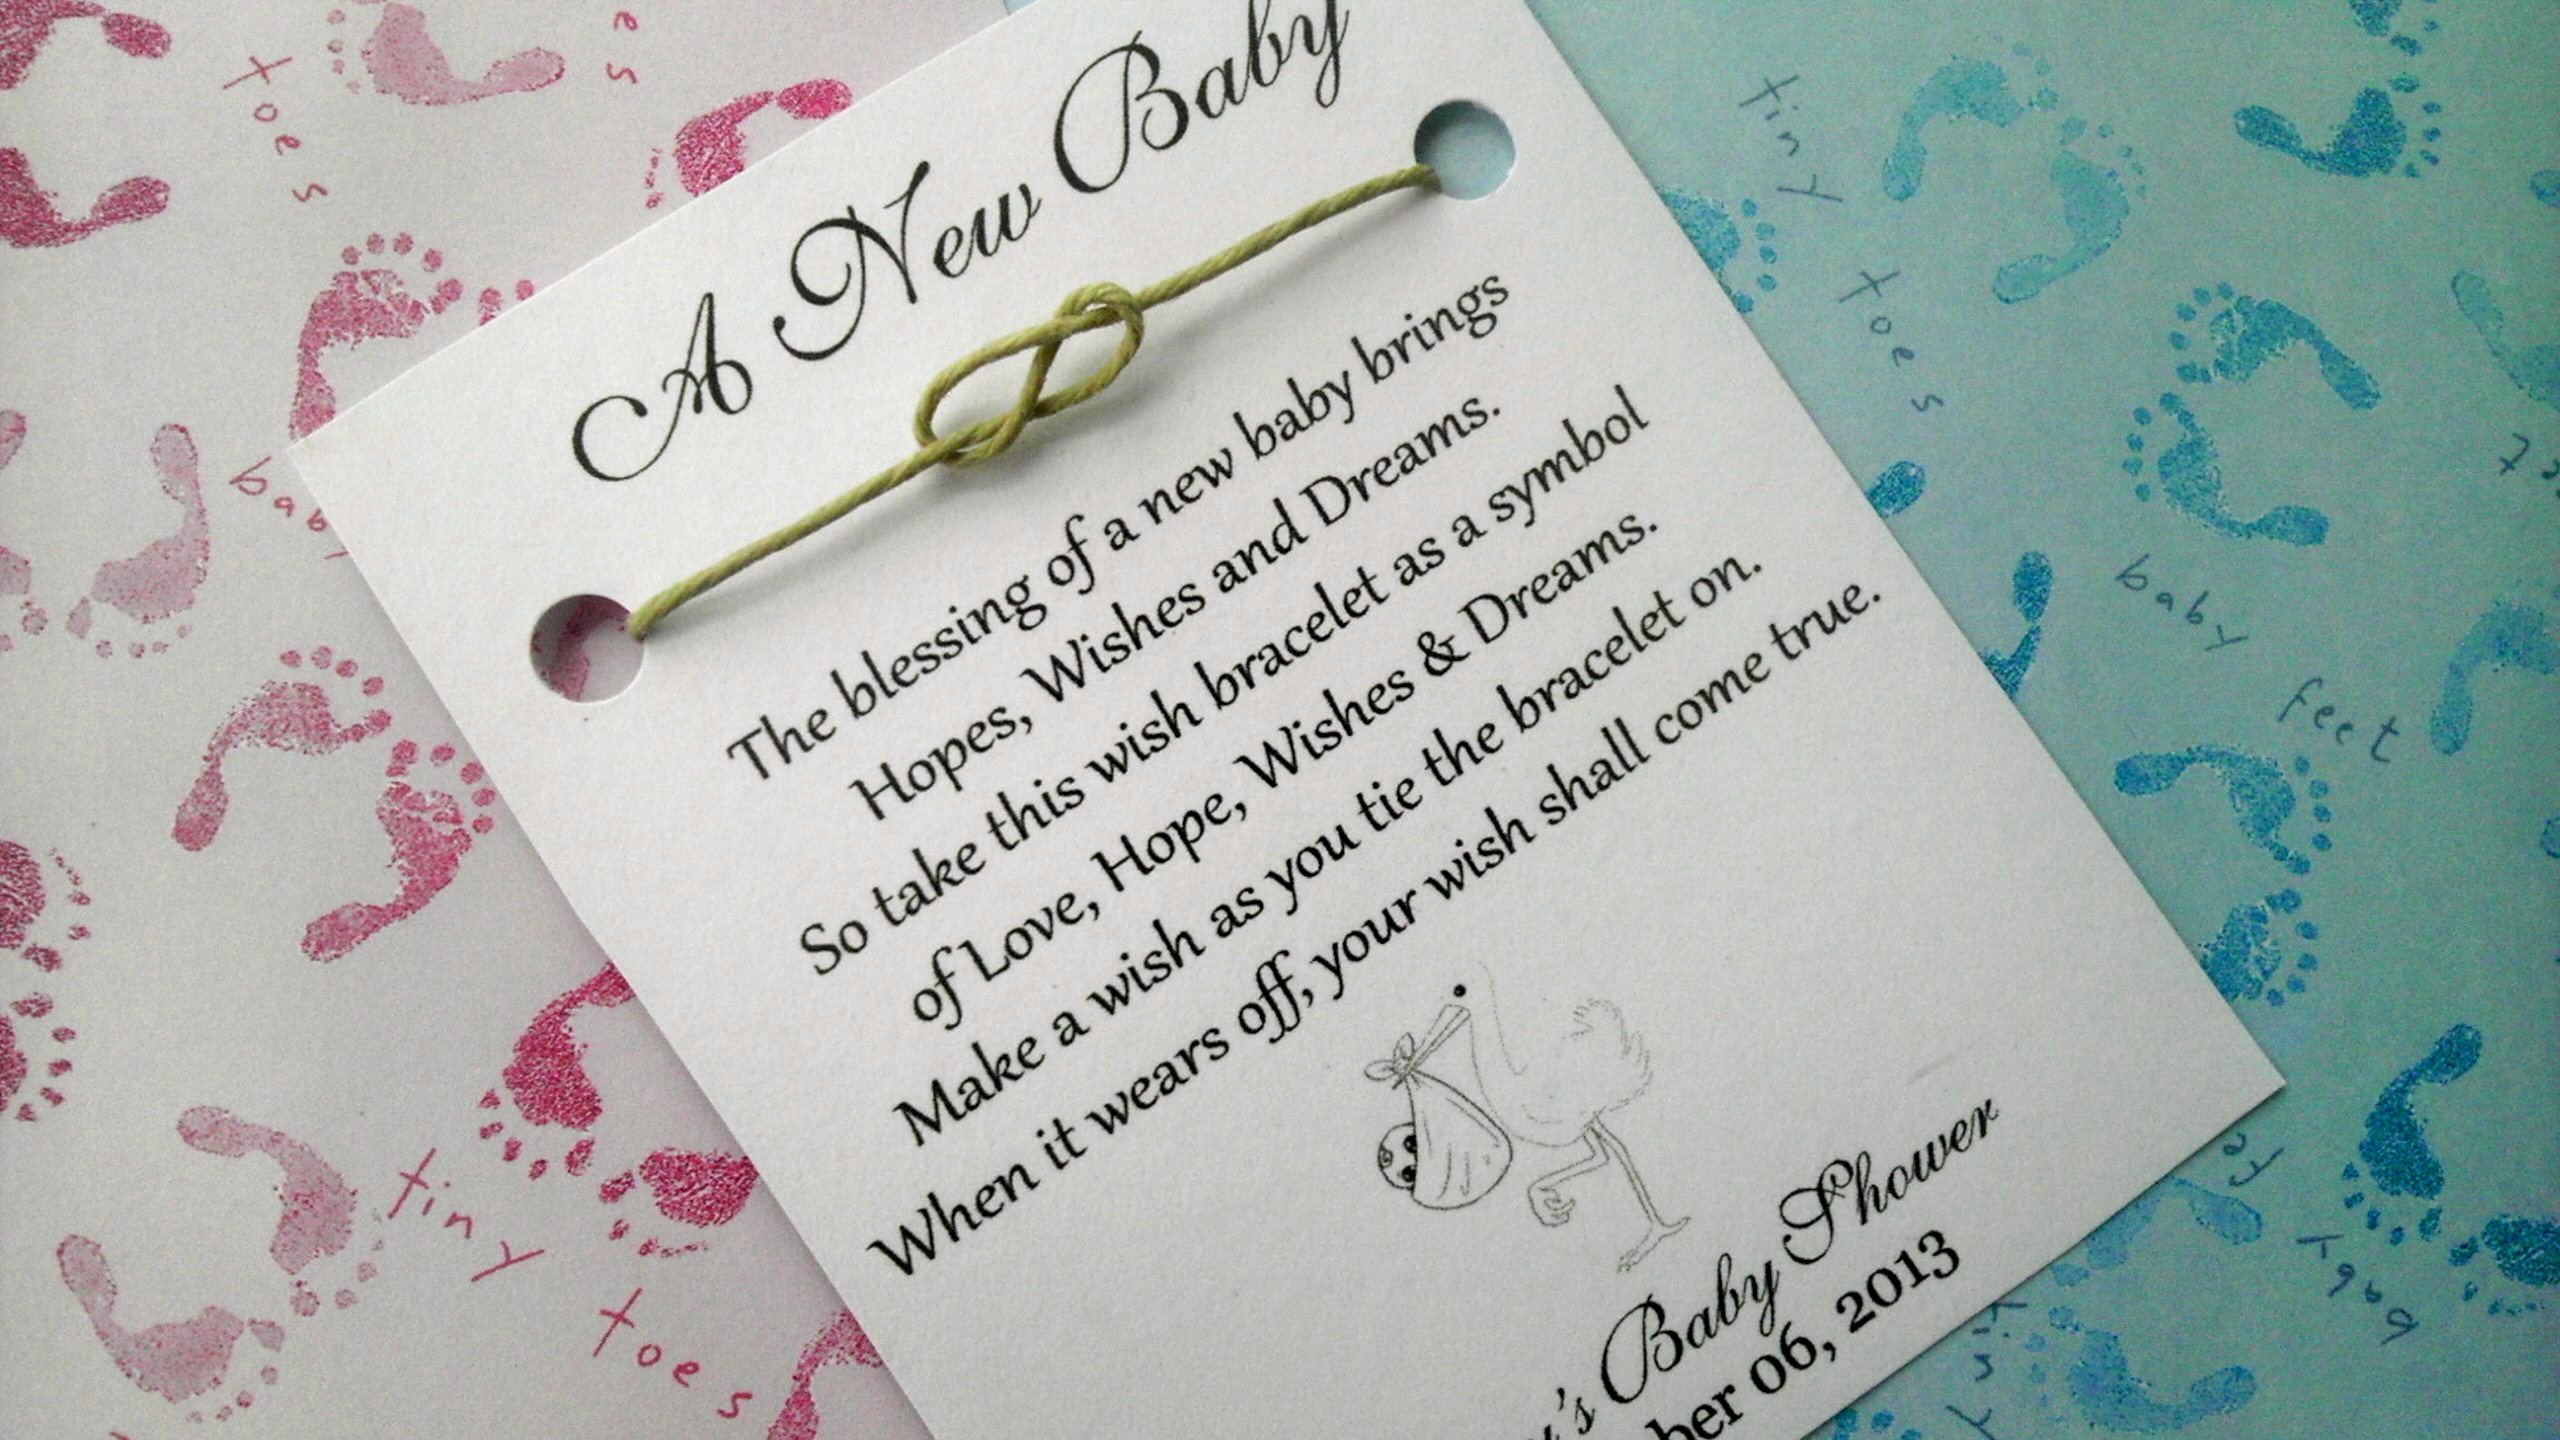 Full Size of Baby Shower:stylish Baby Shower Wishes Picture Inspirations Baby Shower Food Ideas With Baby Shower Etiquette Plus Baby Shower Gifts For Girls Together With Baby Shower Rentals As Well As Baby Shower Venues Nyc